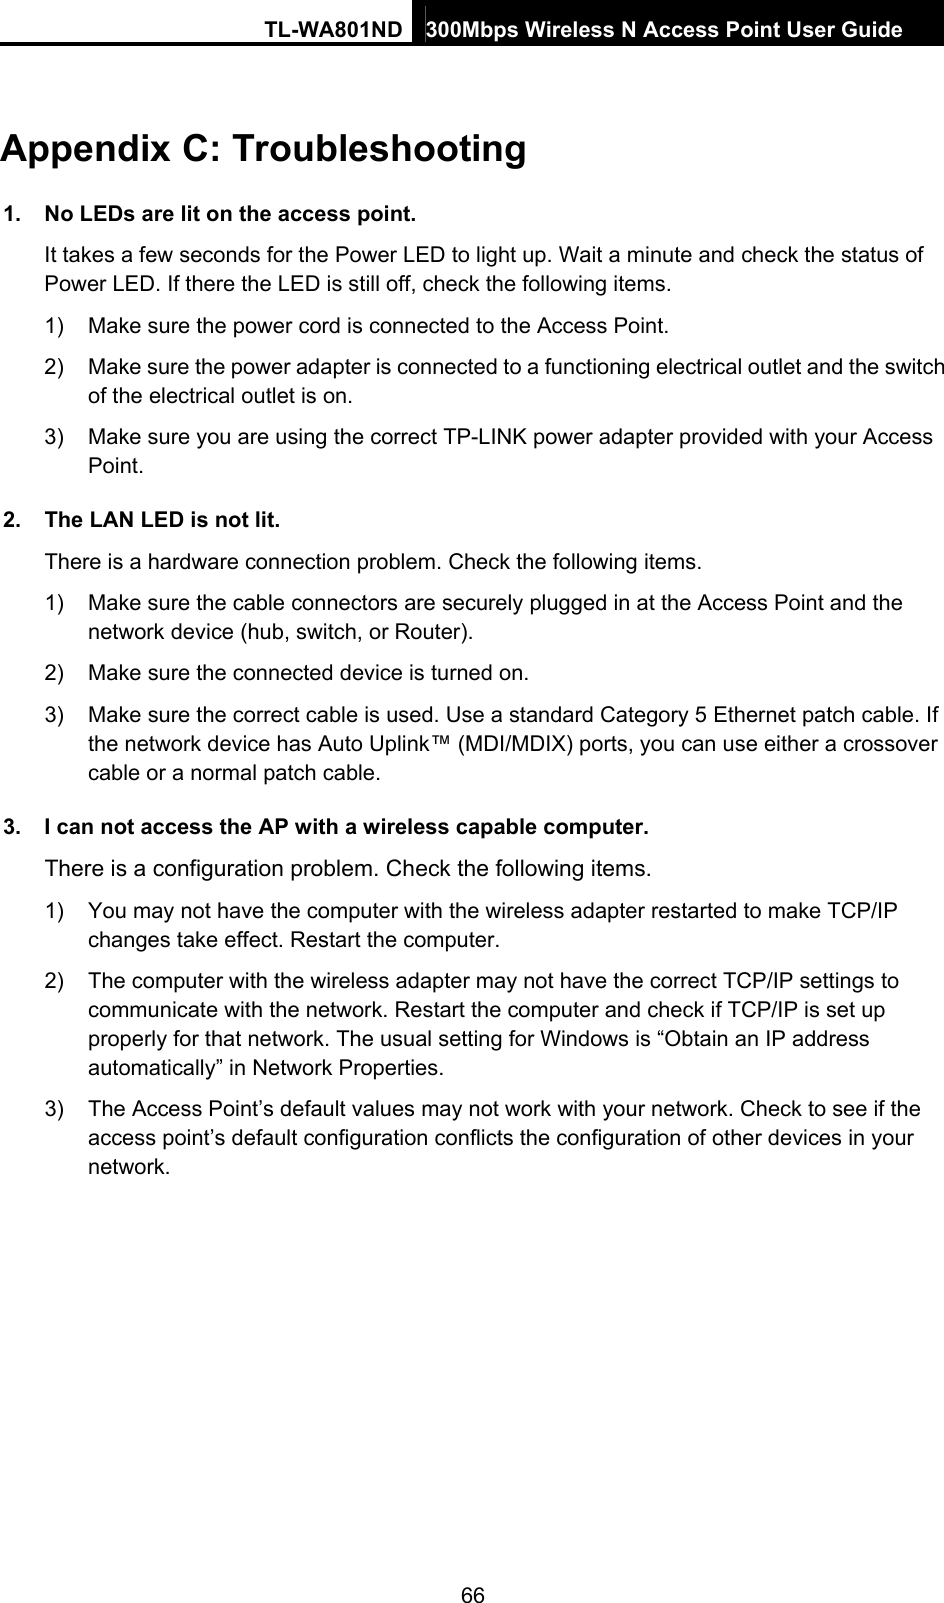 TL-WA801ND 300Mbps Wireless N Access Point User Guide  66 Appendix C: Troubleshooting 1.  No LEDs are lit on the access point. It takes a few seconds for the Power LED to light up. Wait a minute and check the status of Power LED. If there the LED is still off, check the following items. 1)  Make sure the power cord is connected to the Access Point. 2)  Make sure the power adapter is connected to a functioning electrical outlet and the switch of the electrical outlet is on. 3)  Make sure you are using the correct TP-LINK power adapter provided with your Access Point. 2.  The LAN LED is not lit. There is a hardware connection problem. Check the following items. 1)  Make sure the cable connectors are securely plugged in at the Access Point and the network device (hub, switch, or Router). 2)  Make sure the connected device is turned on. 3)  Make sure the correct cable is used. Use a standard Category 5 Ethernet patch cable. If the network device has Auto Uplink™ (MDI/MDIX) ports, you can use either a crossover cable or a normal patch cable. 3.  I can not access the AP with a wireless capable computer. There is a configuration problem. Check the following items. 1)  You may not have the computer with the wireless adapter restarted to make TCP/IP changes take effect. Restart the computer. 2)  The computer with the wireless adapter may not have the correct TCP/IP settings to communicate with the network. Restart the computer and check if TCP/IP is set up properly for that network. The usual setting for Windows is “Obtain an IP address automatically” in Network Properties. 3)  The Access Point’s default values may not work with your network. Check to see if the access point’s default configuration conflicts the configuration of other devices in your network. 